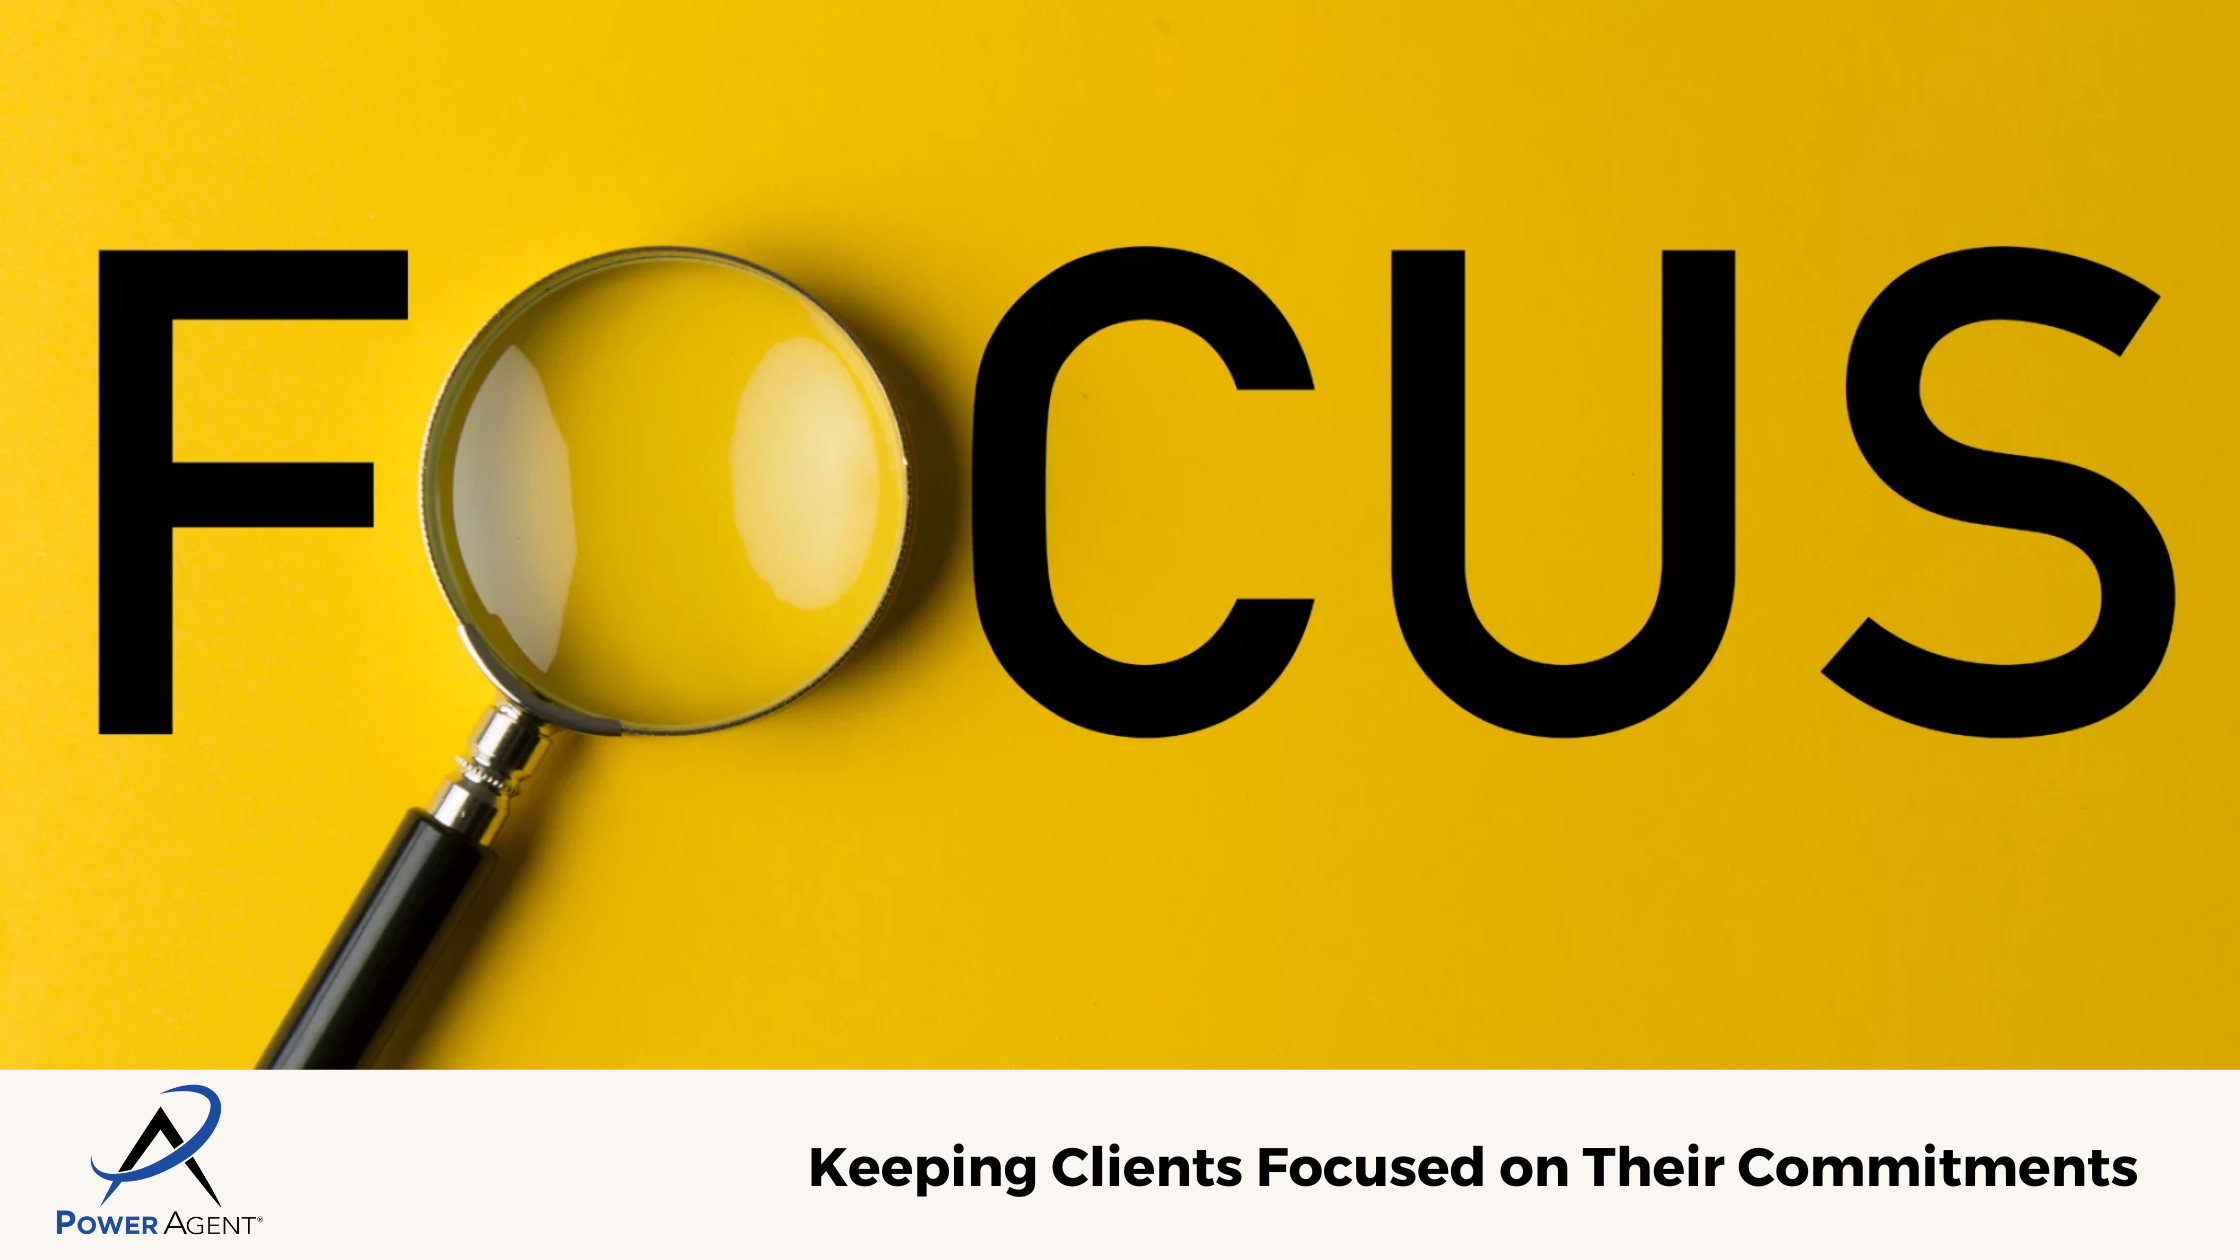 Keeping Clients Focused on Their Commitments